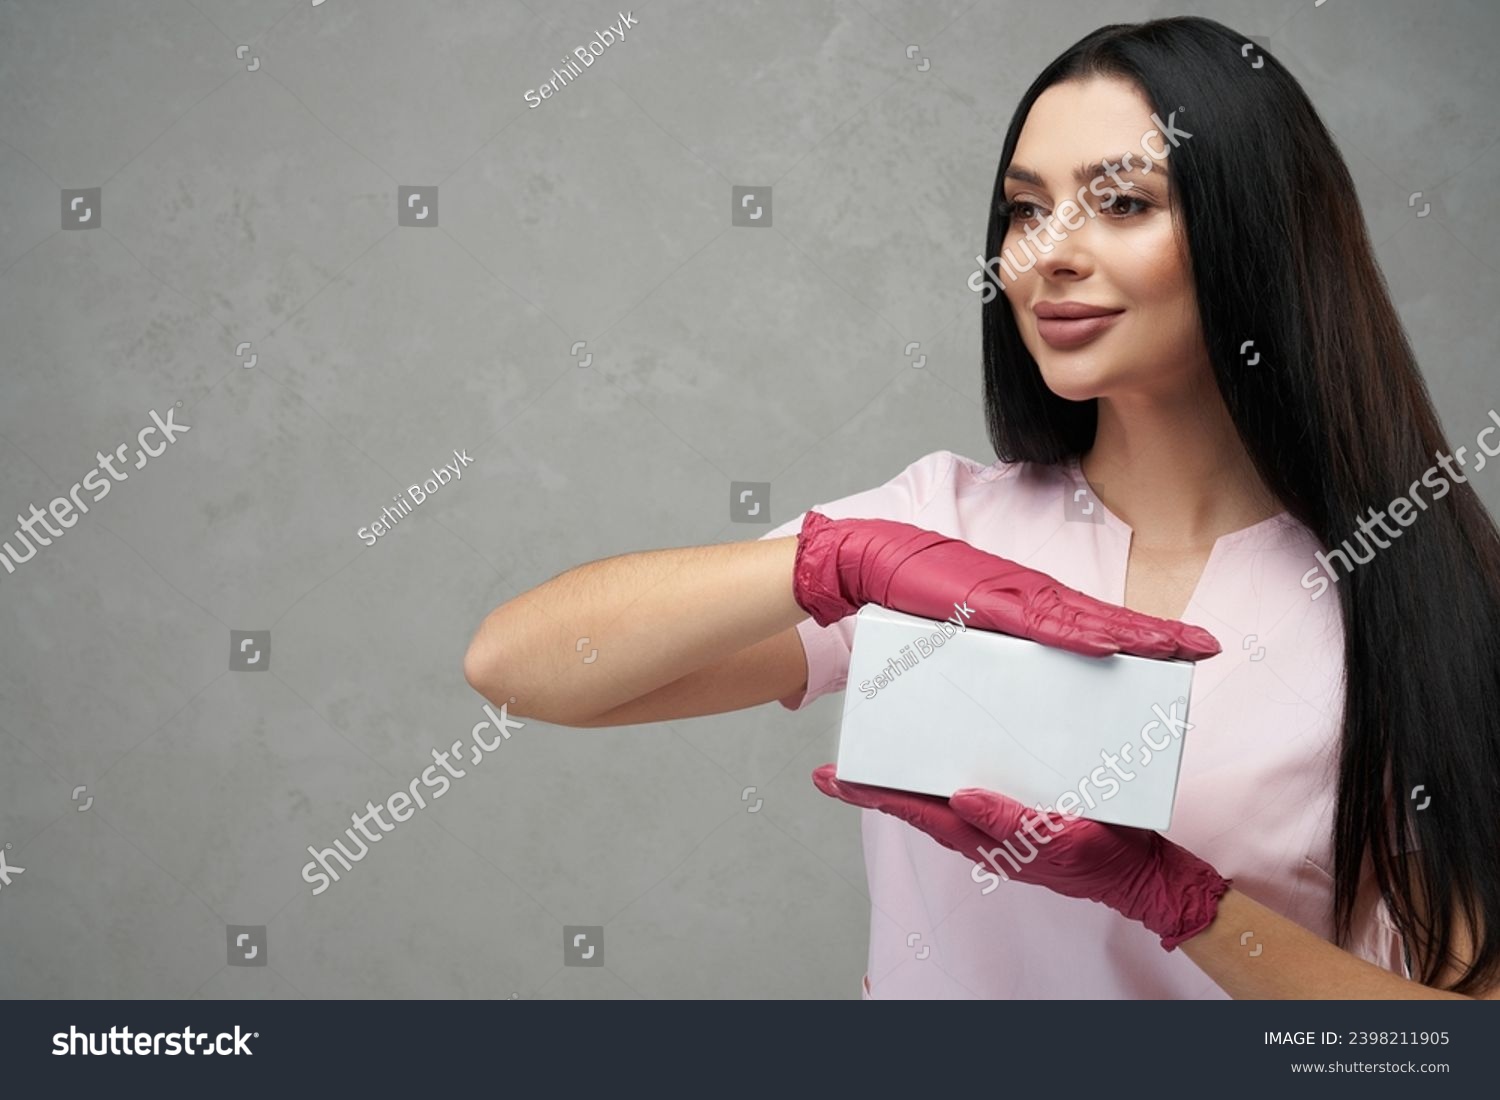 Happy female cosmetologist holding white box with both hands. Portrait of dark haired pretty woman wearing pink gloves and uniform, showing small box against grey wall. Beauty, cosmetology concept. #2398211905